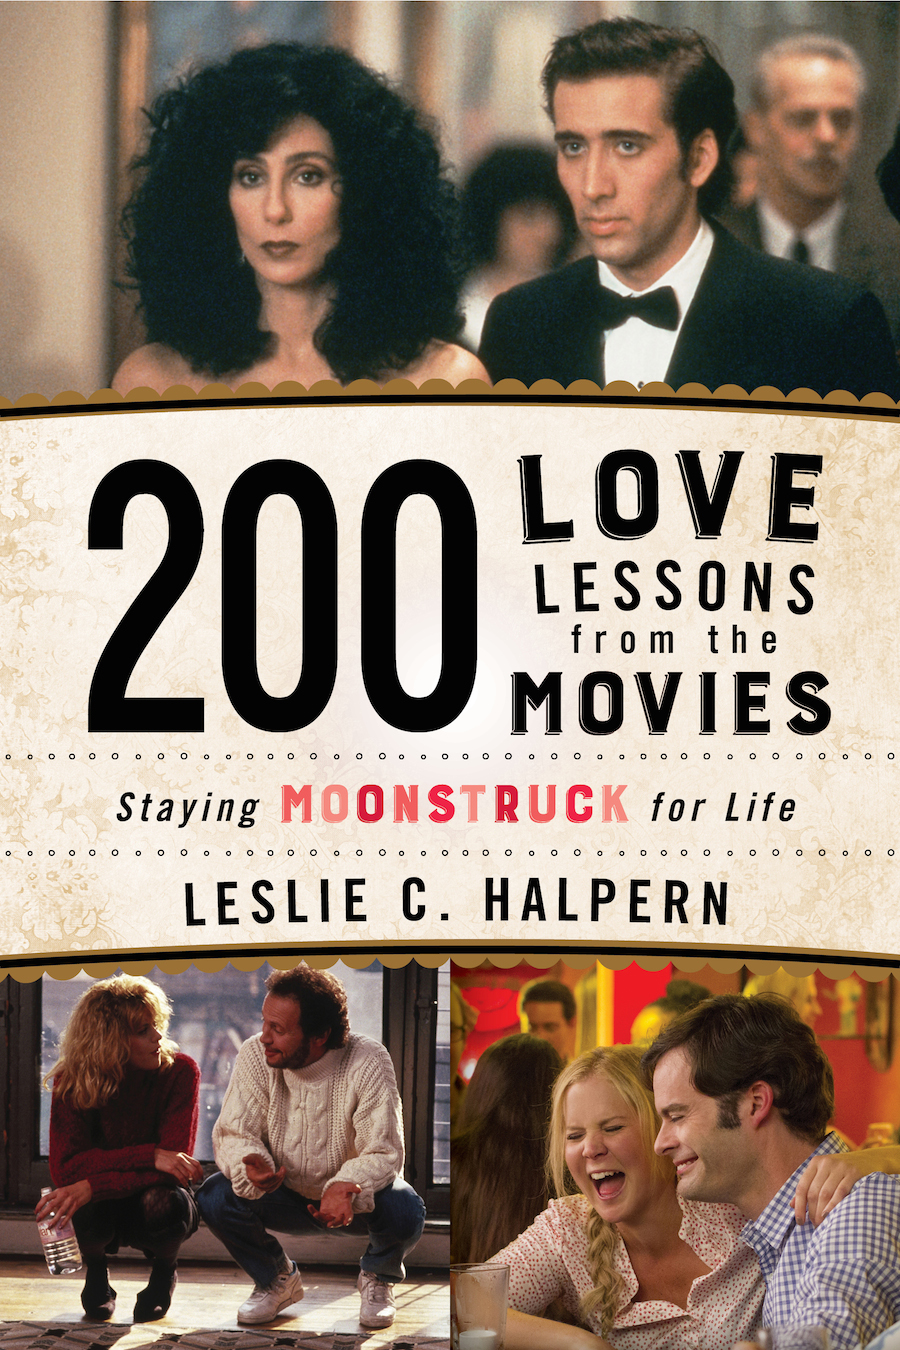 Leslie Halpern On Her Book, 200 Love Lessons From the Movies